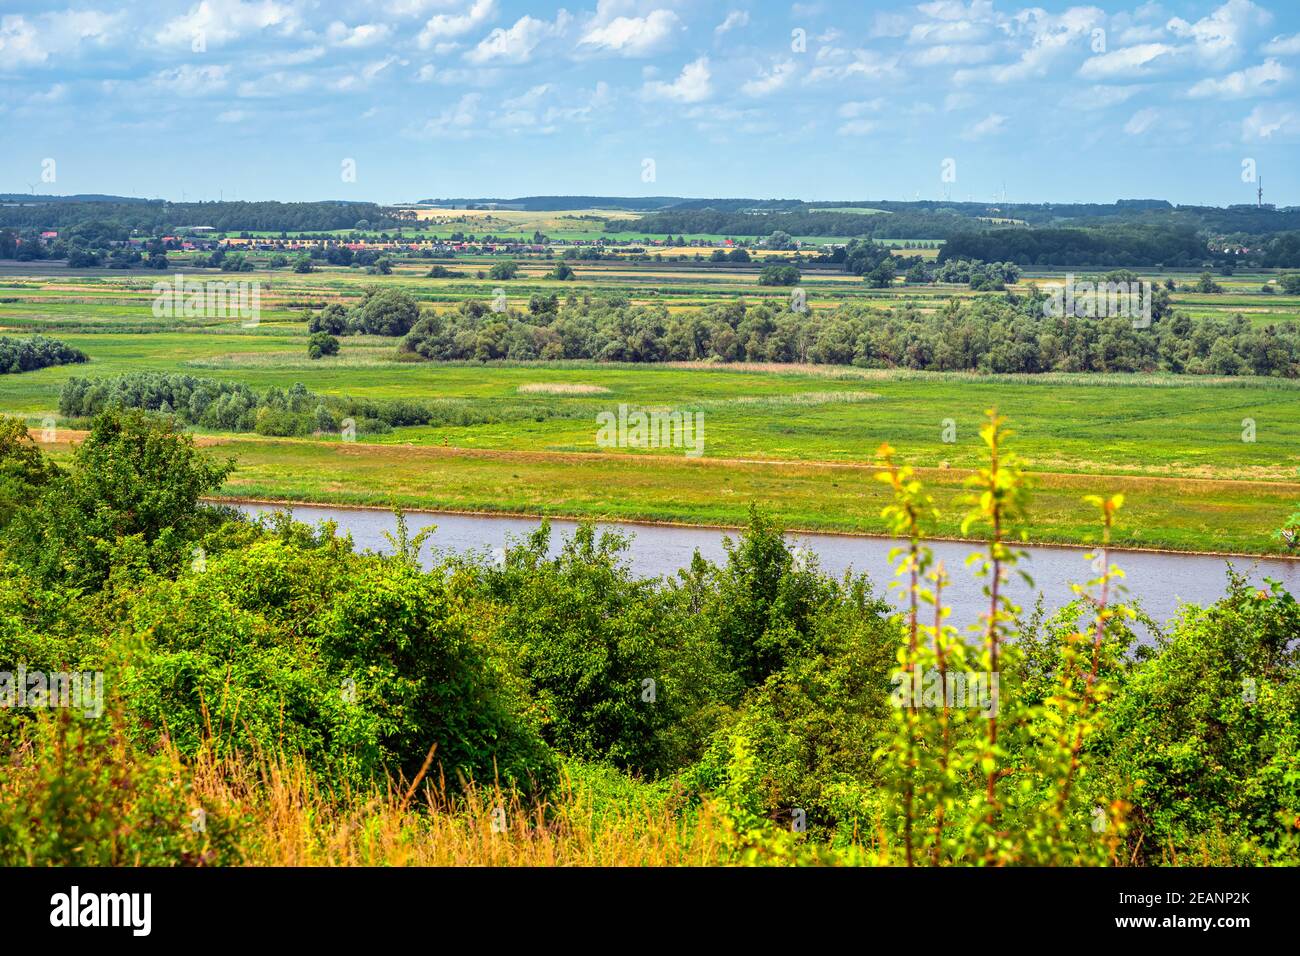 Summer rural landscape with a river, forest and an agriculture field Stock Photo